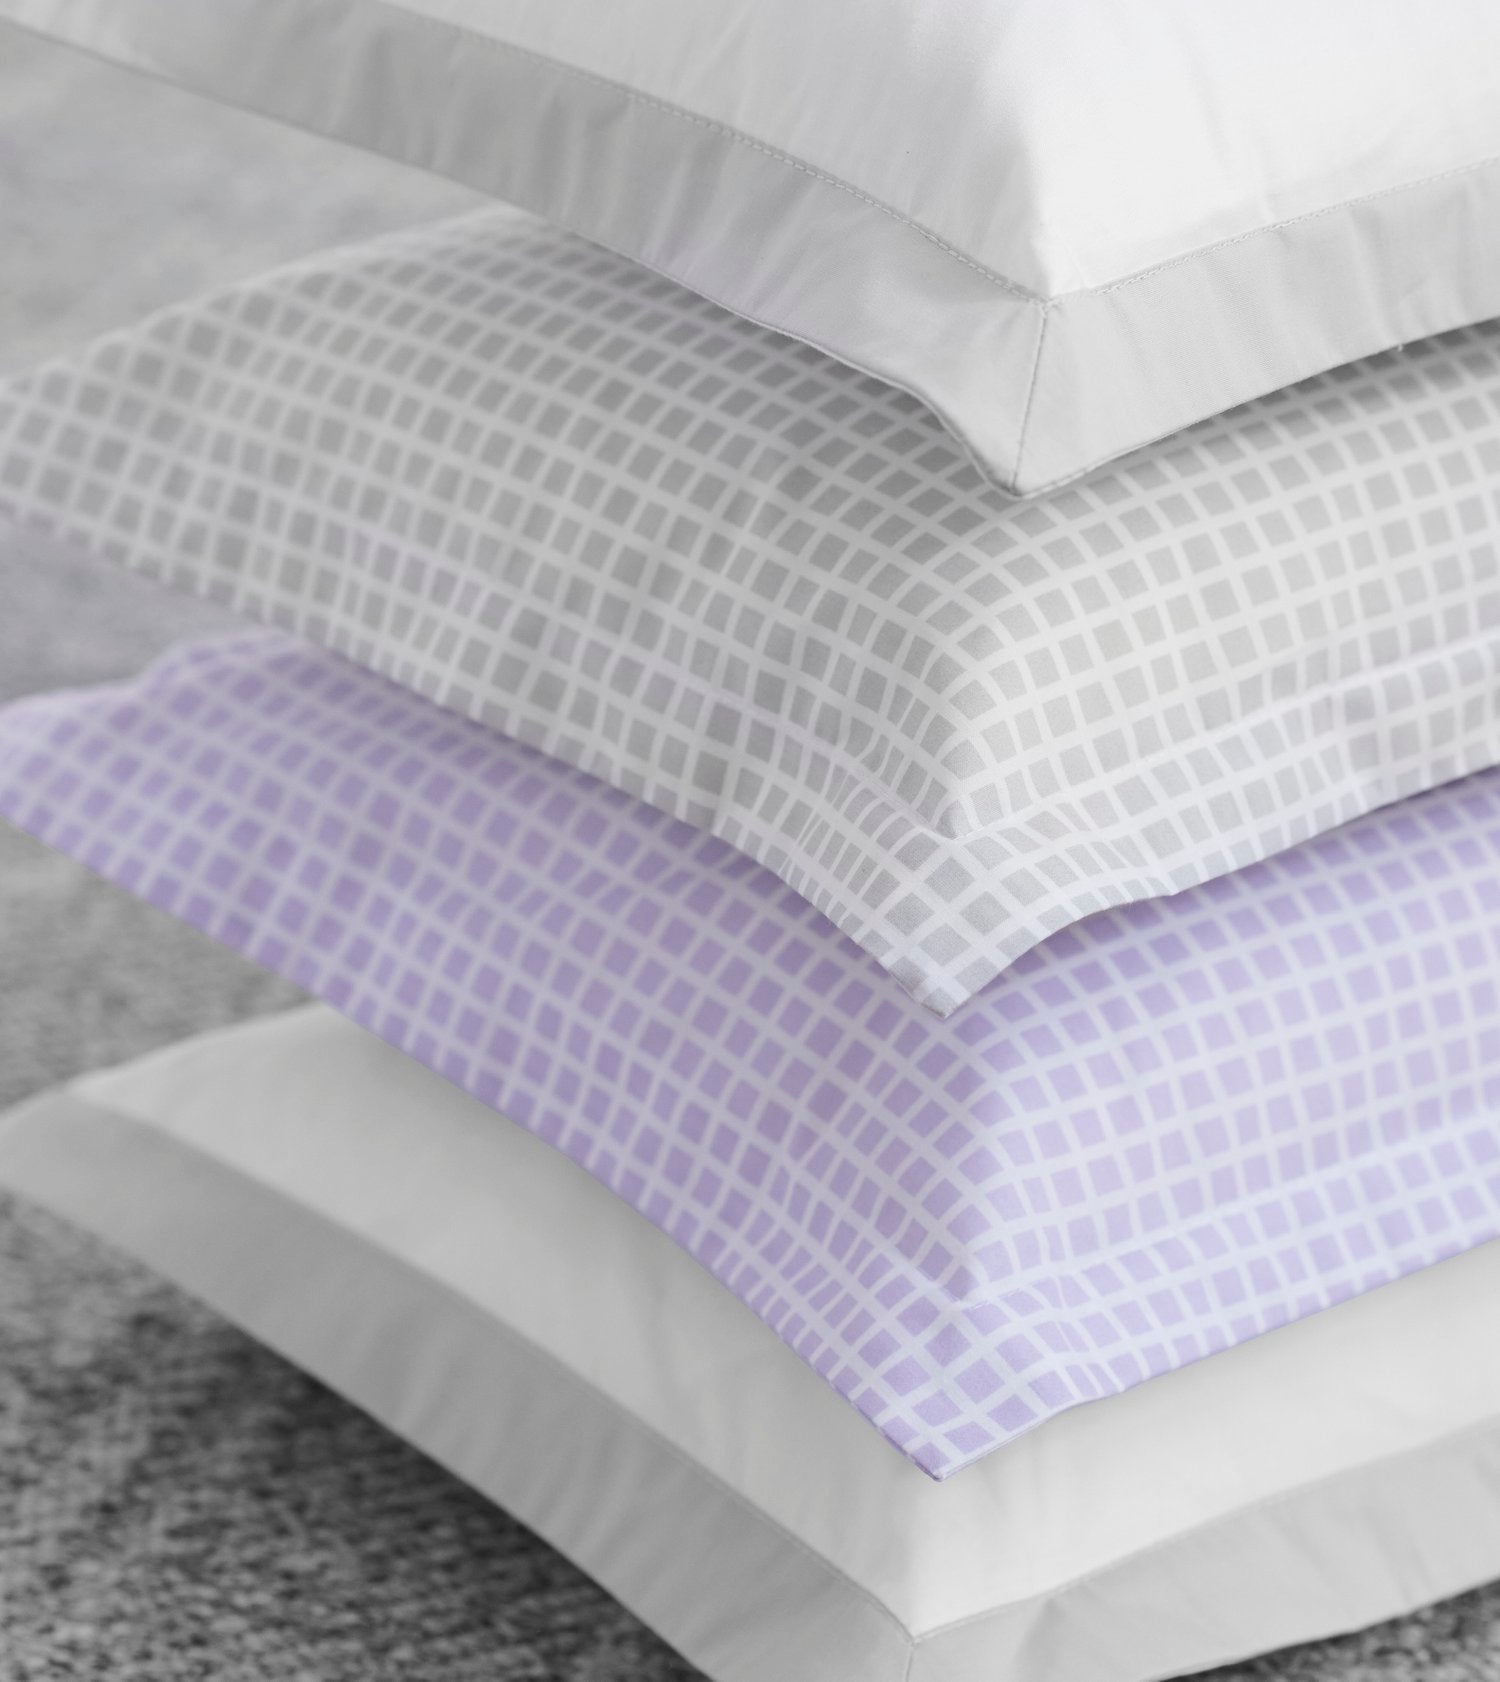 Lucia Bed Linens